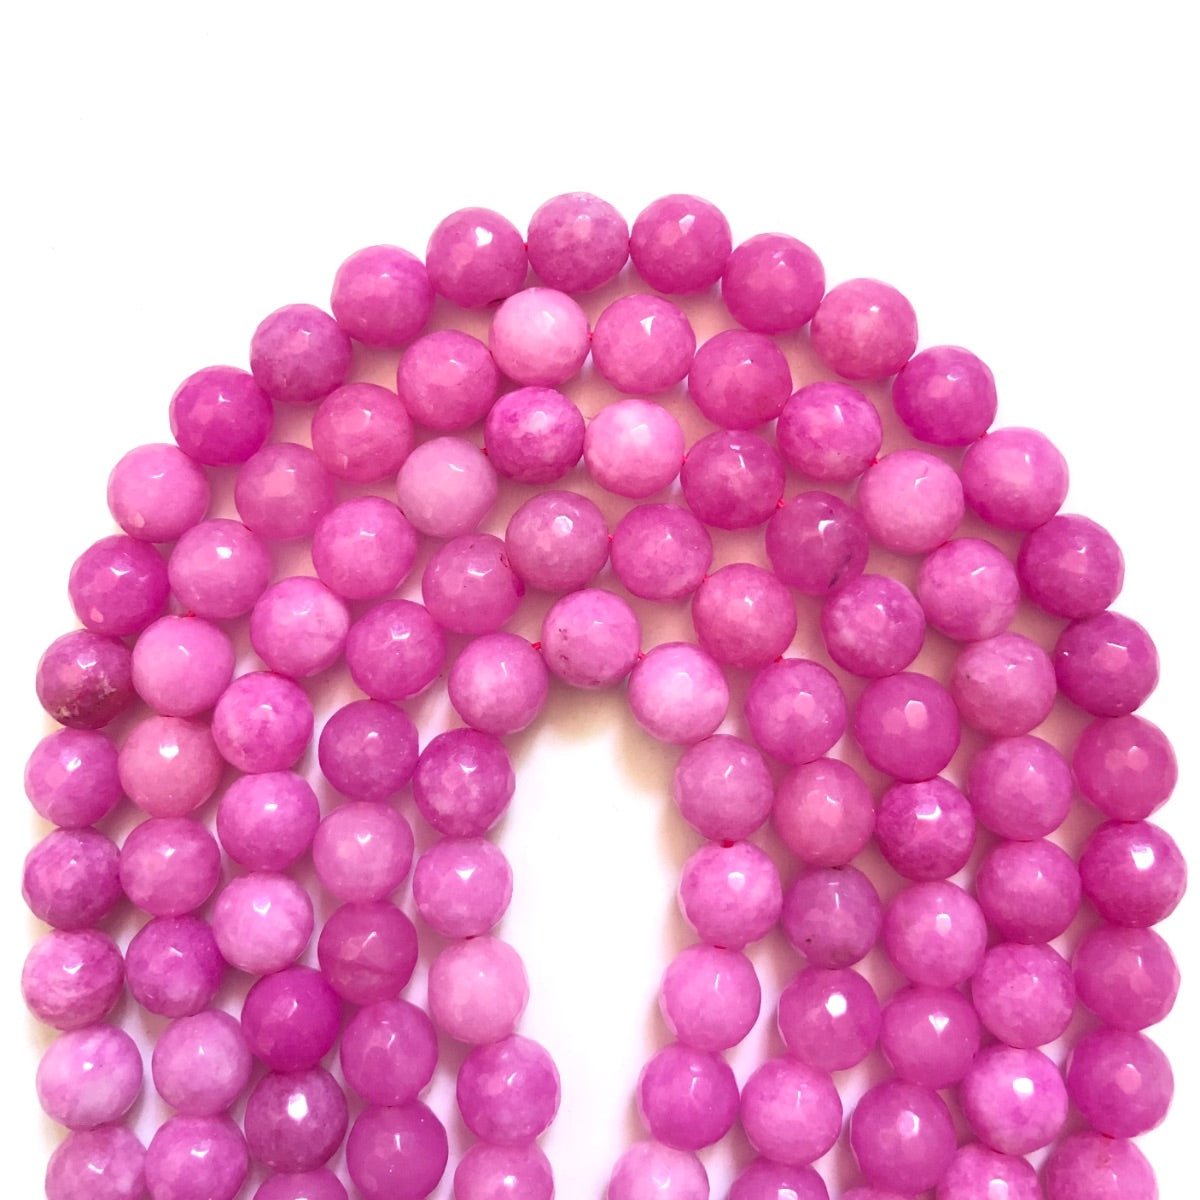 2 Strands/lot 10mm Fuchsia Faceted Jade Stone Beads Stone Beads Breast Cancer Awareness Faceted Jade Beads New Beads Arrivals Charms Beads Beyond